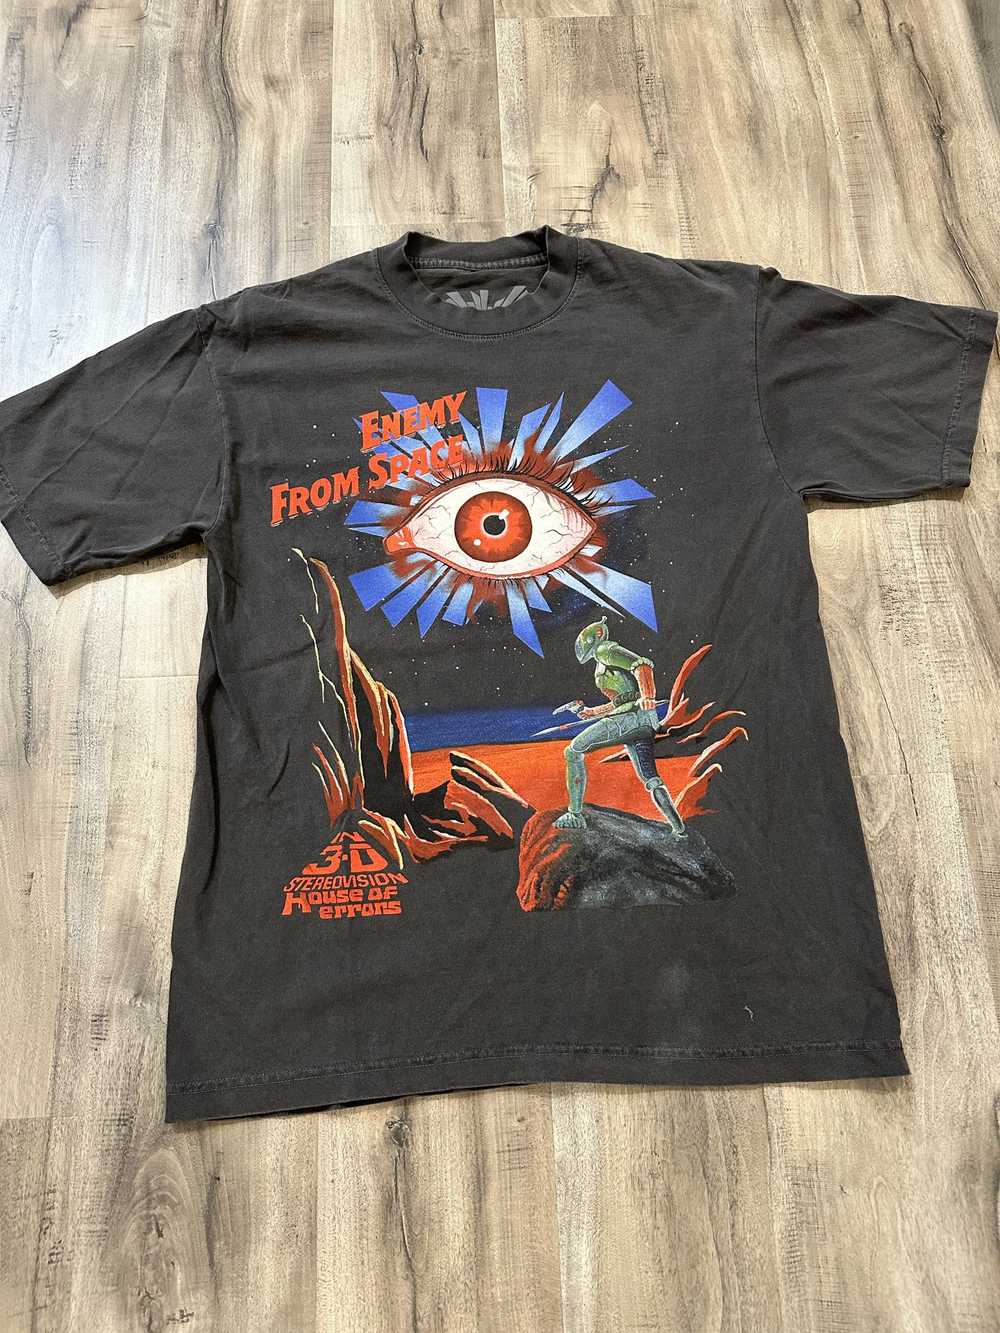 House of Errors Enemy from Space Tee - image 2